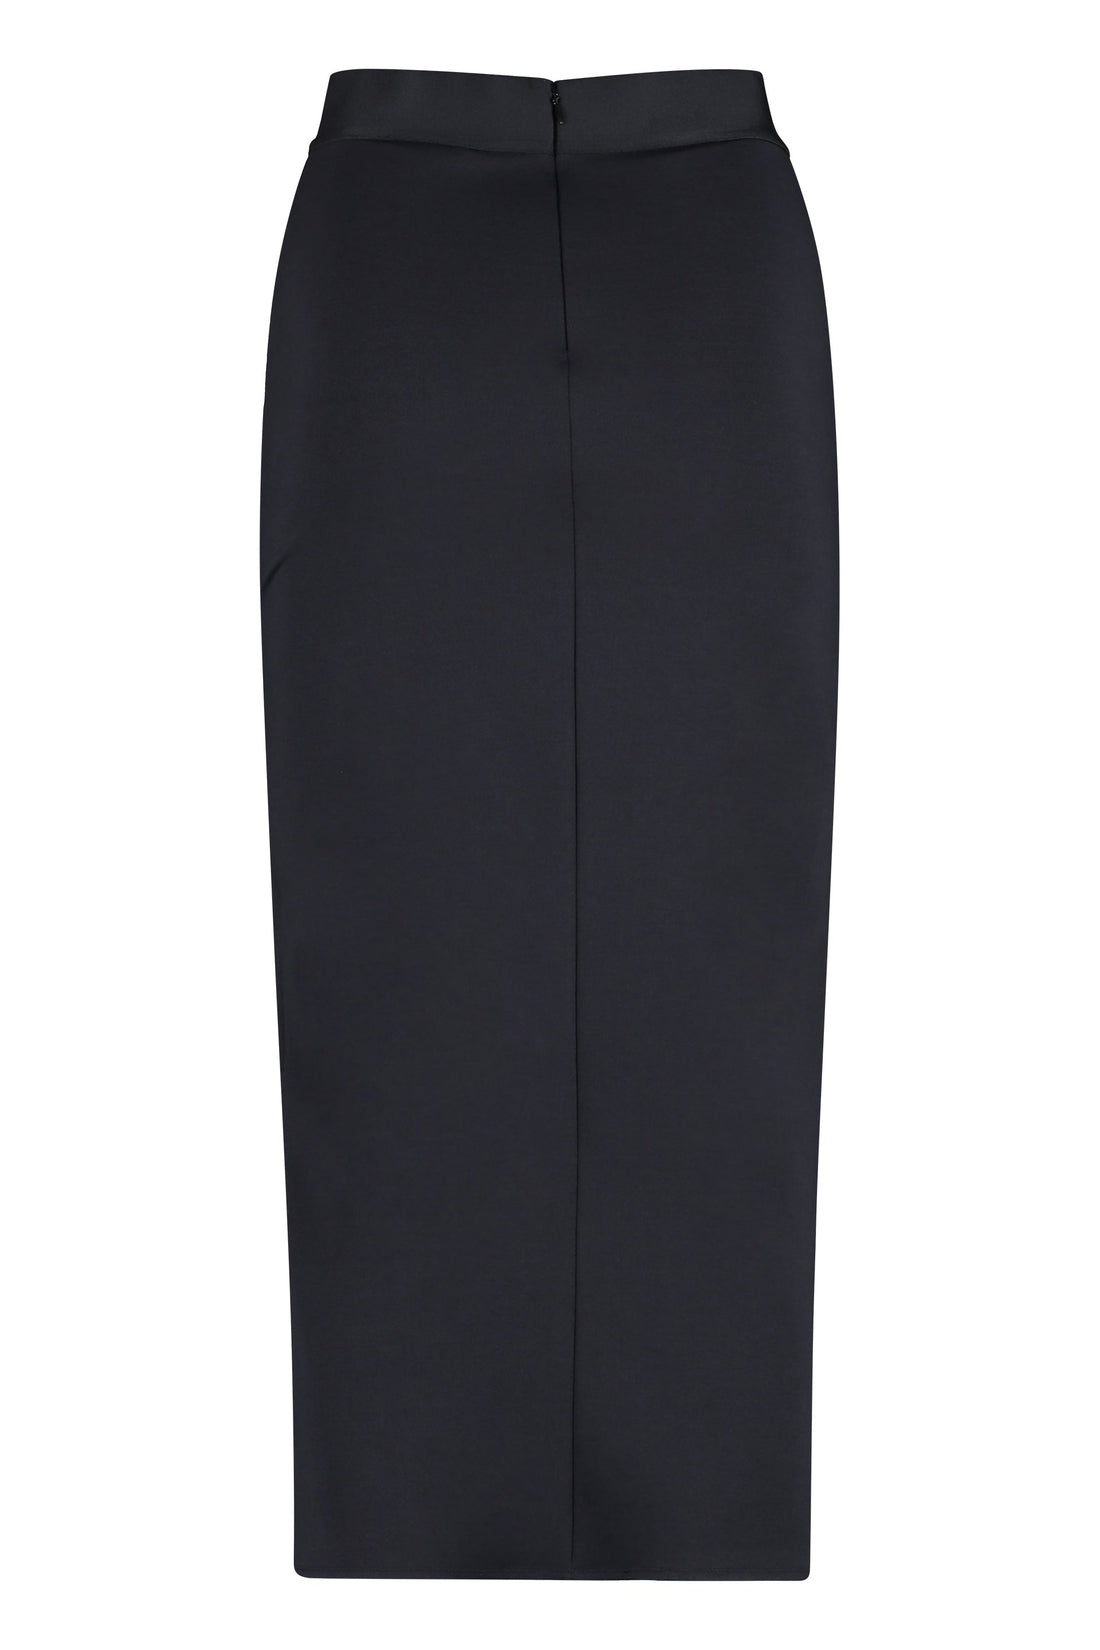 Dolce & Gabbana-OUTLET-SALE-Stretch pencil skirt with zip-ARCHIVIST